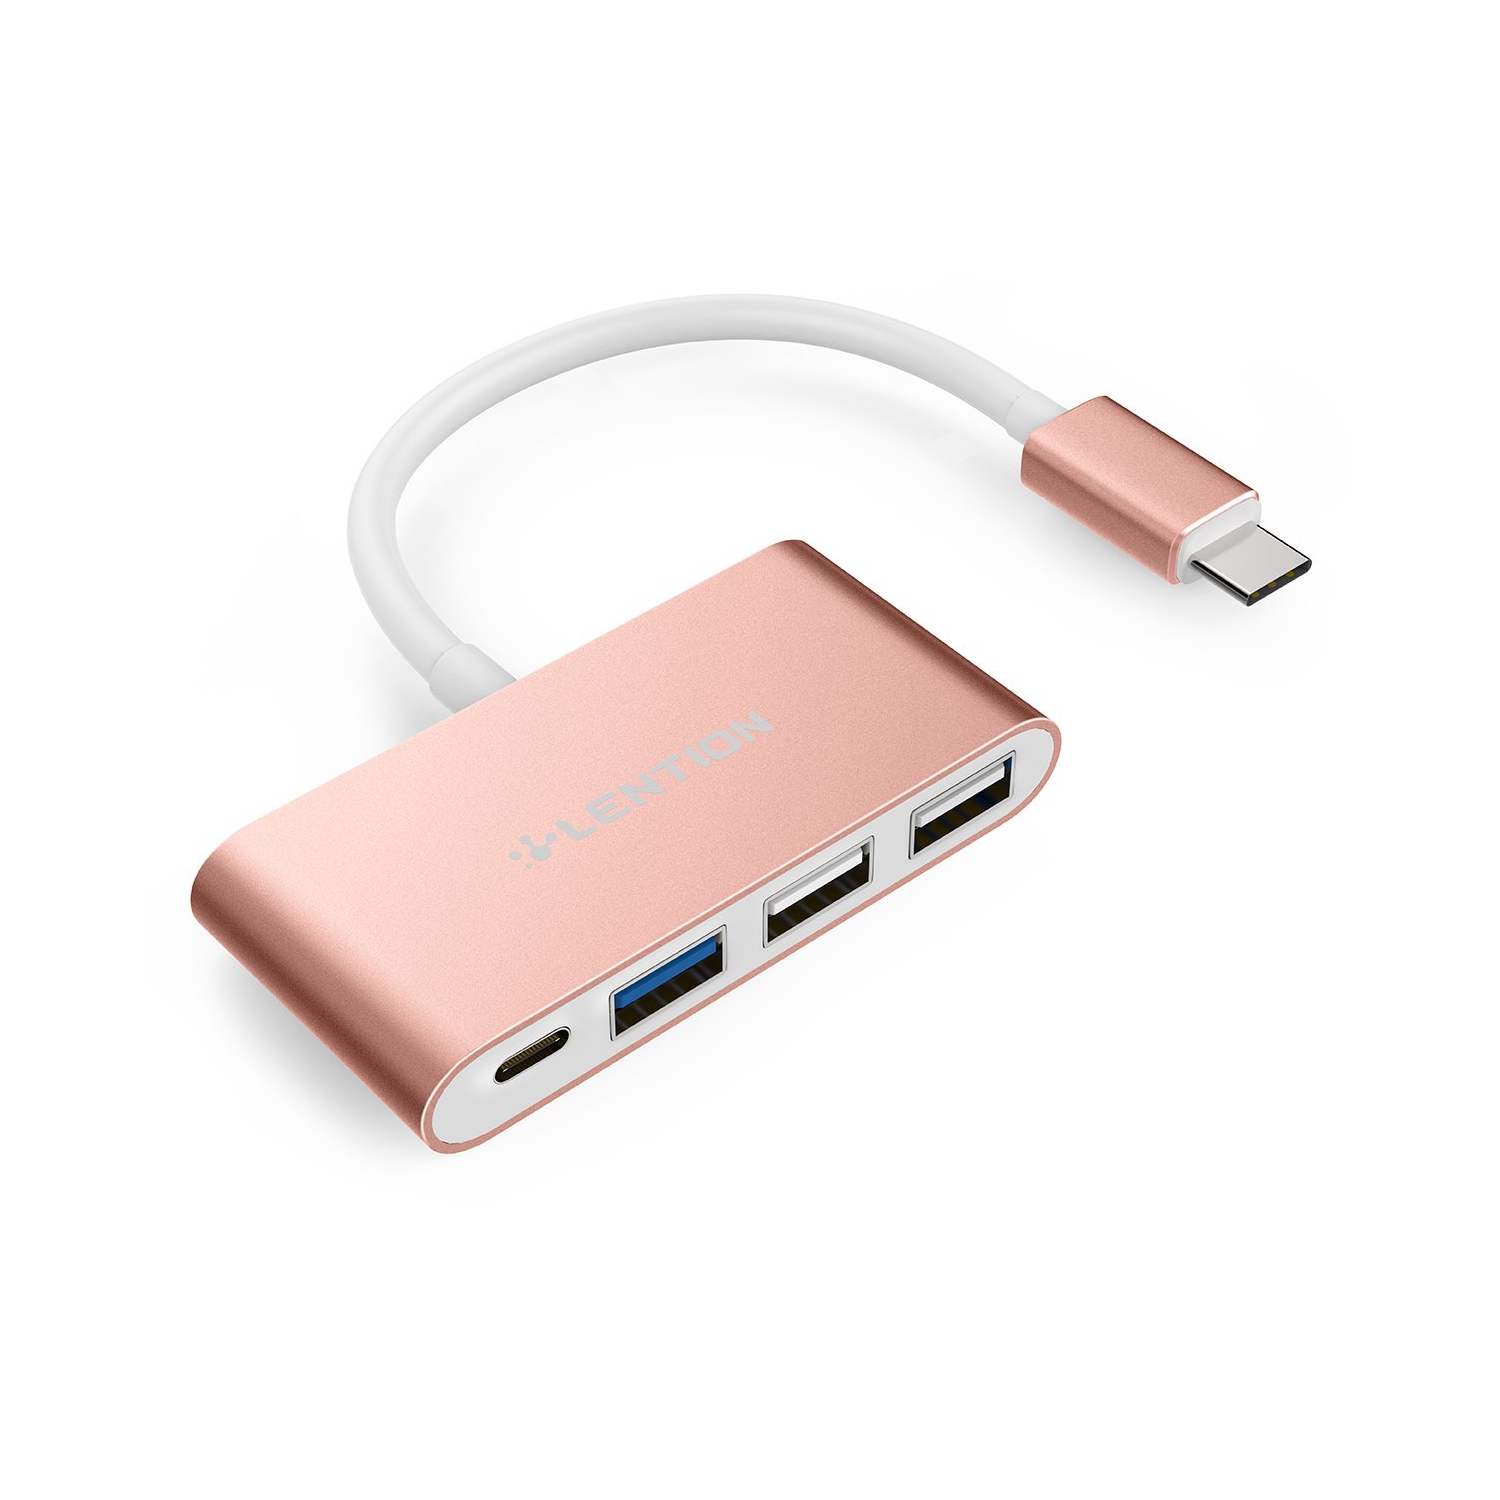 LENTION 4-in-1 USB-C Hub with Type C, USB 3.0, USB 2.0, Compatible 2020-2016 MacBook Pro 13/15/16, New Mac Air/Surface, Chro